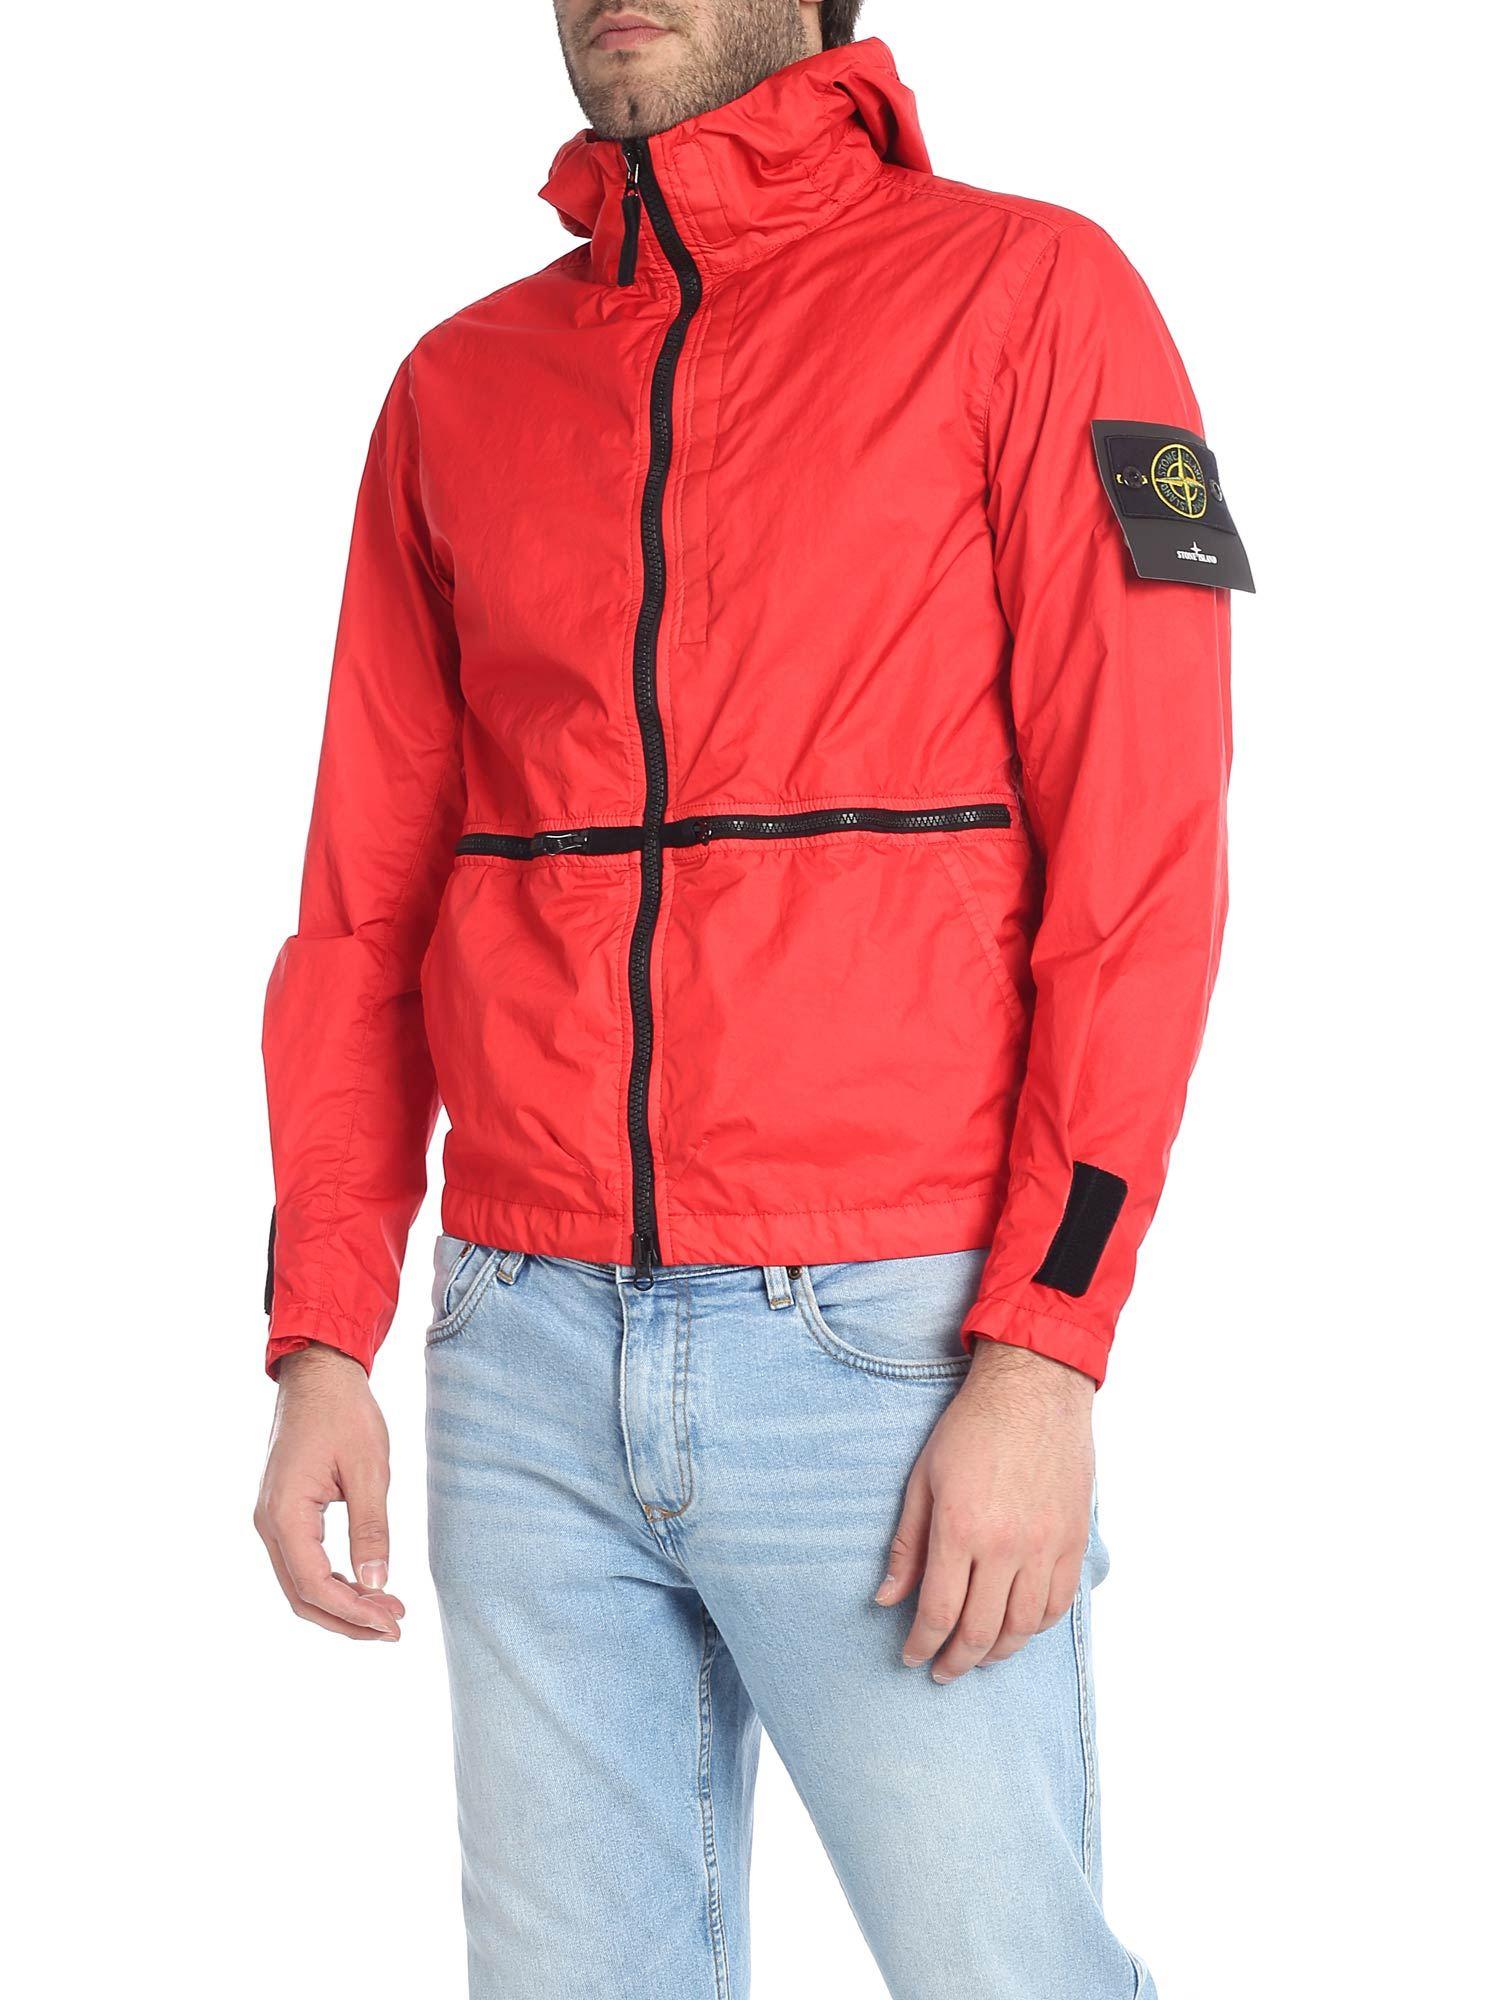 Stone Island Synthetic Membrana 3l Tc Jacket In Red for Men - Lyst